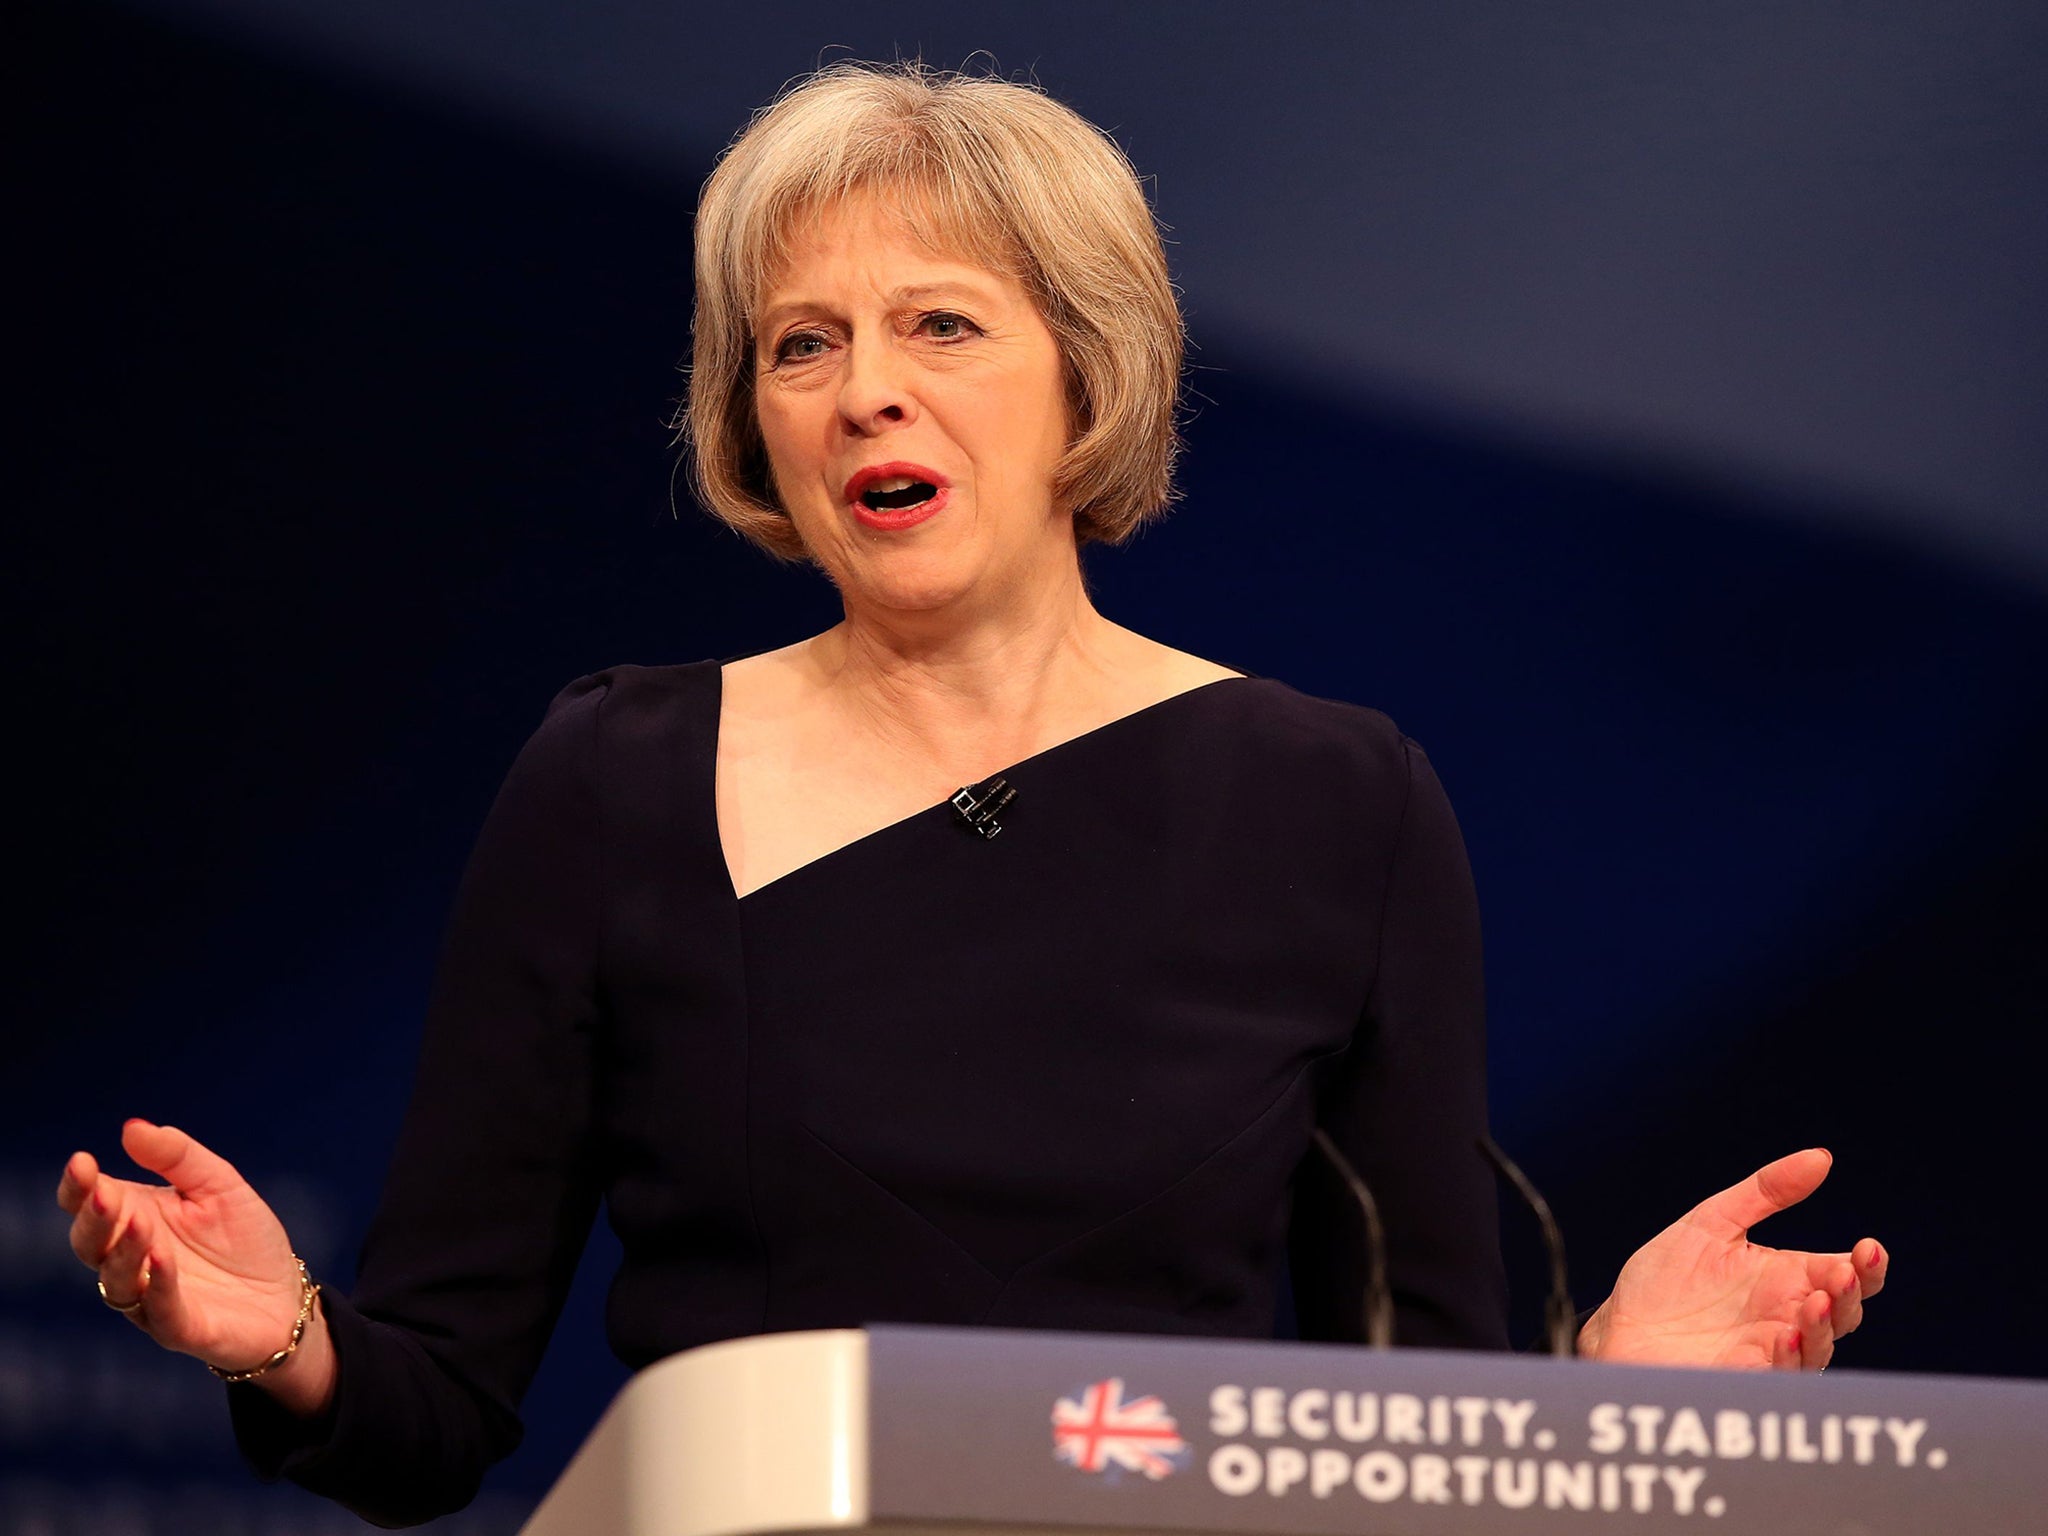 Theresa May delivers her speech to the Conservative Party conference at Manchester Central